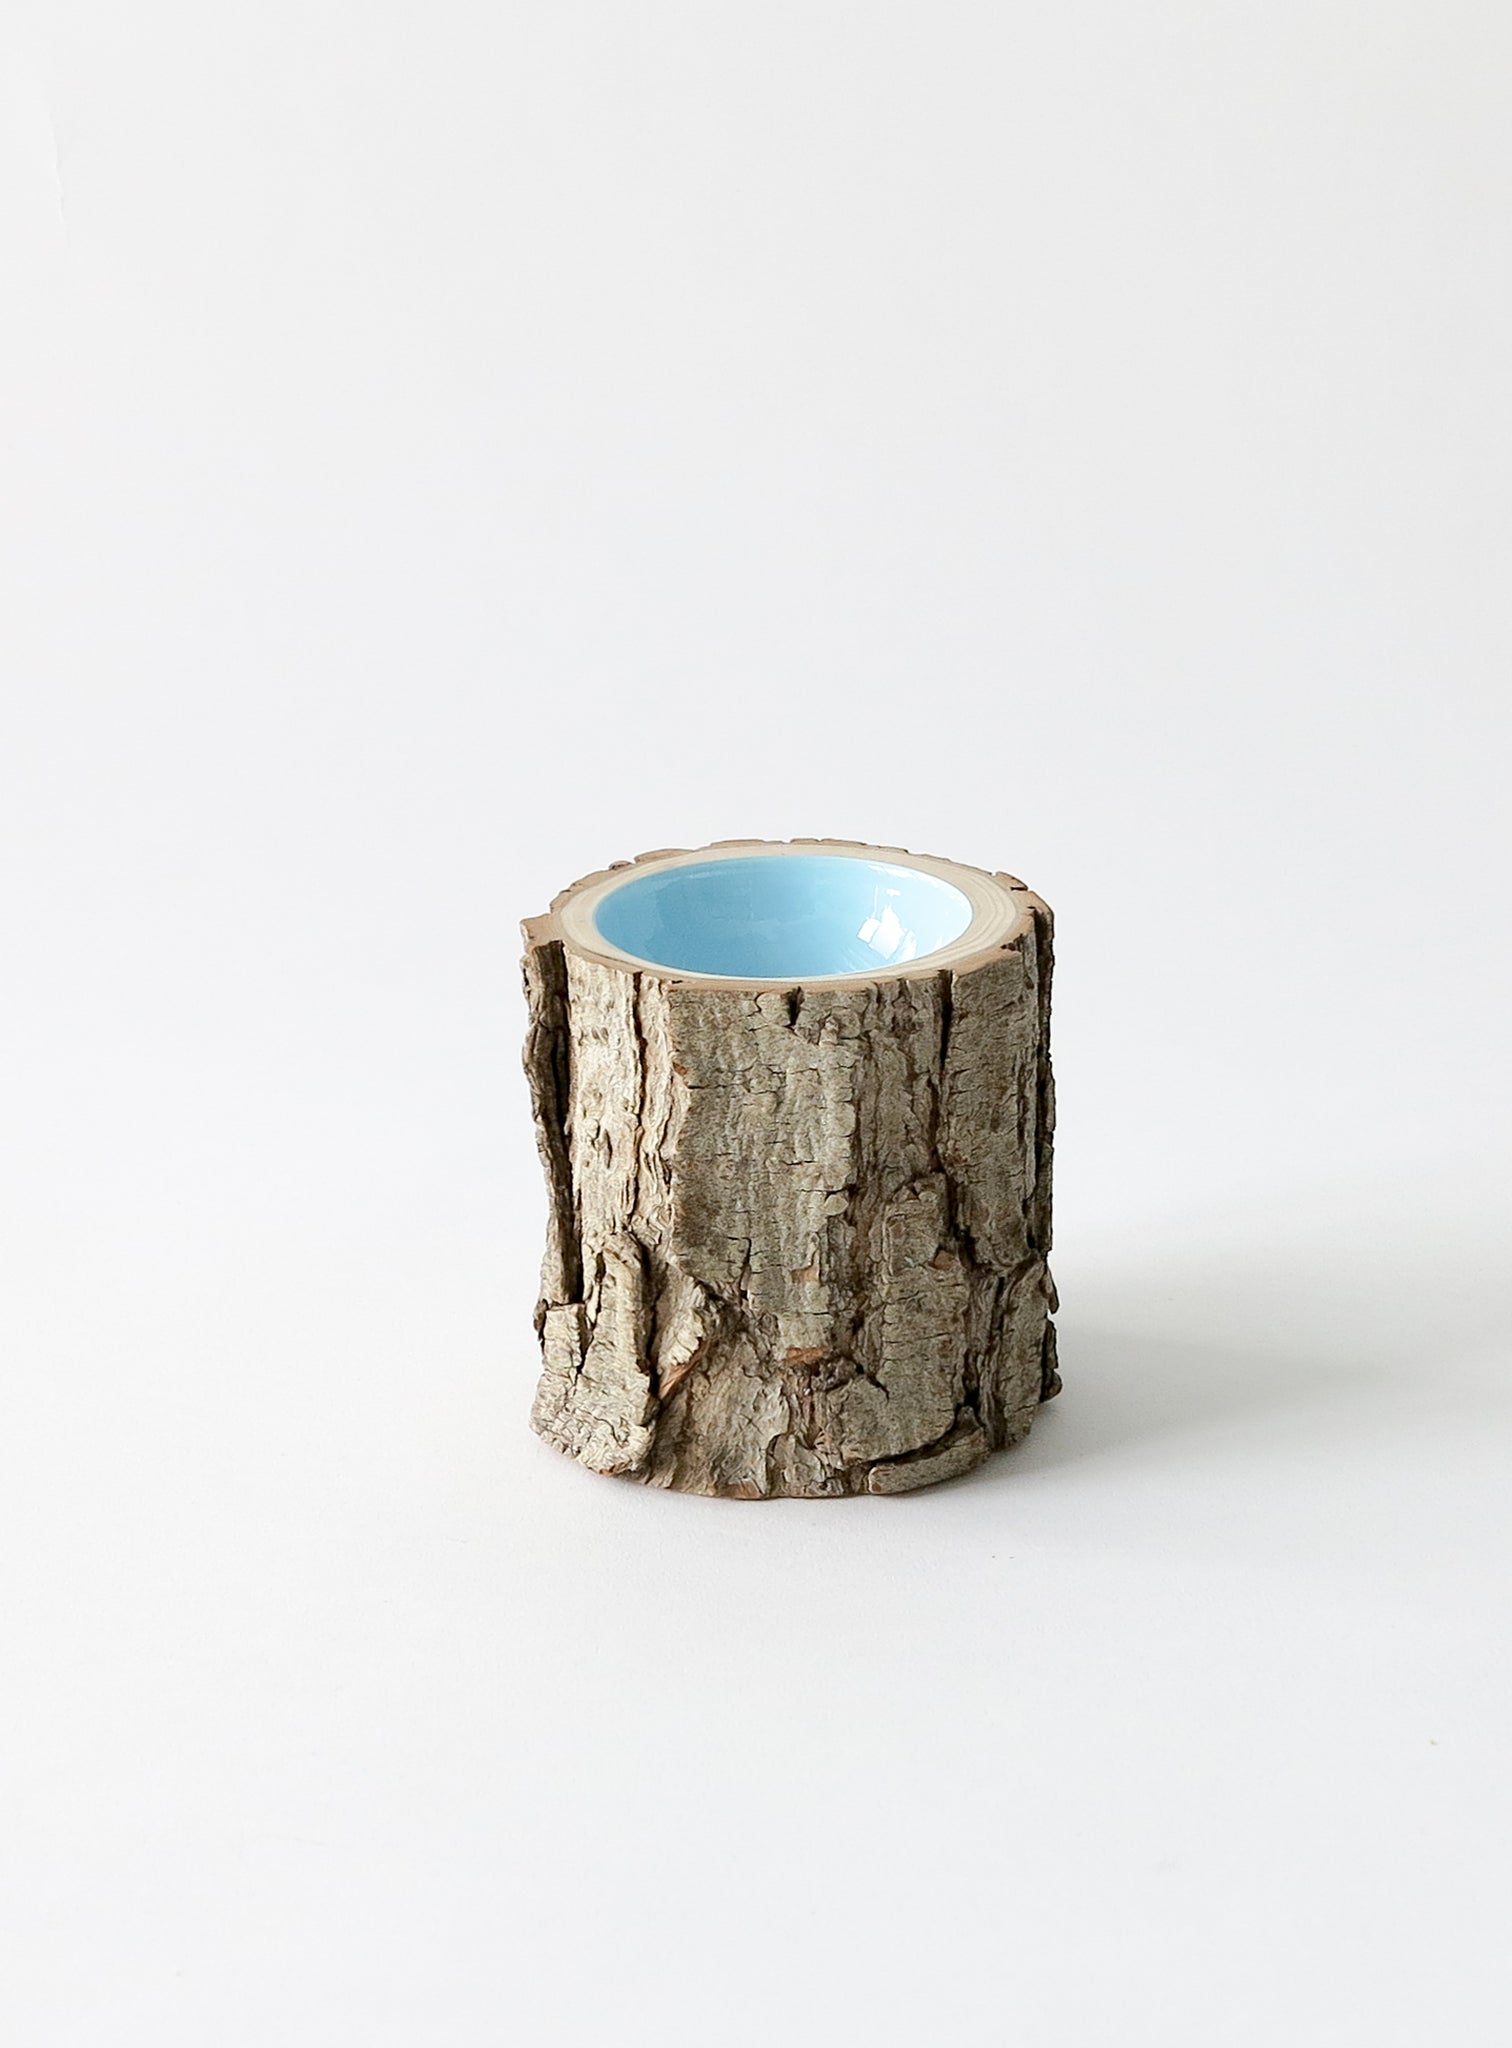 Size 3 Log Bowl - small wooden bowl with rough bark, glossy interior is a sky blue colour.